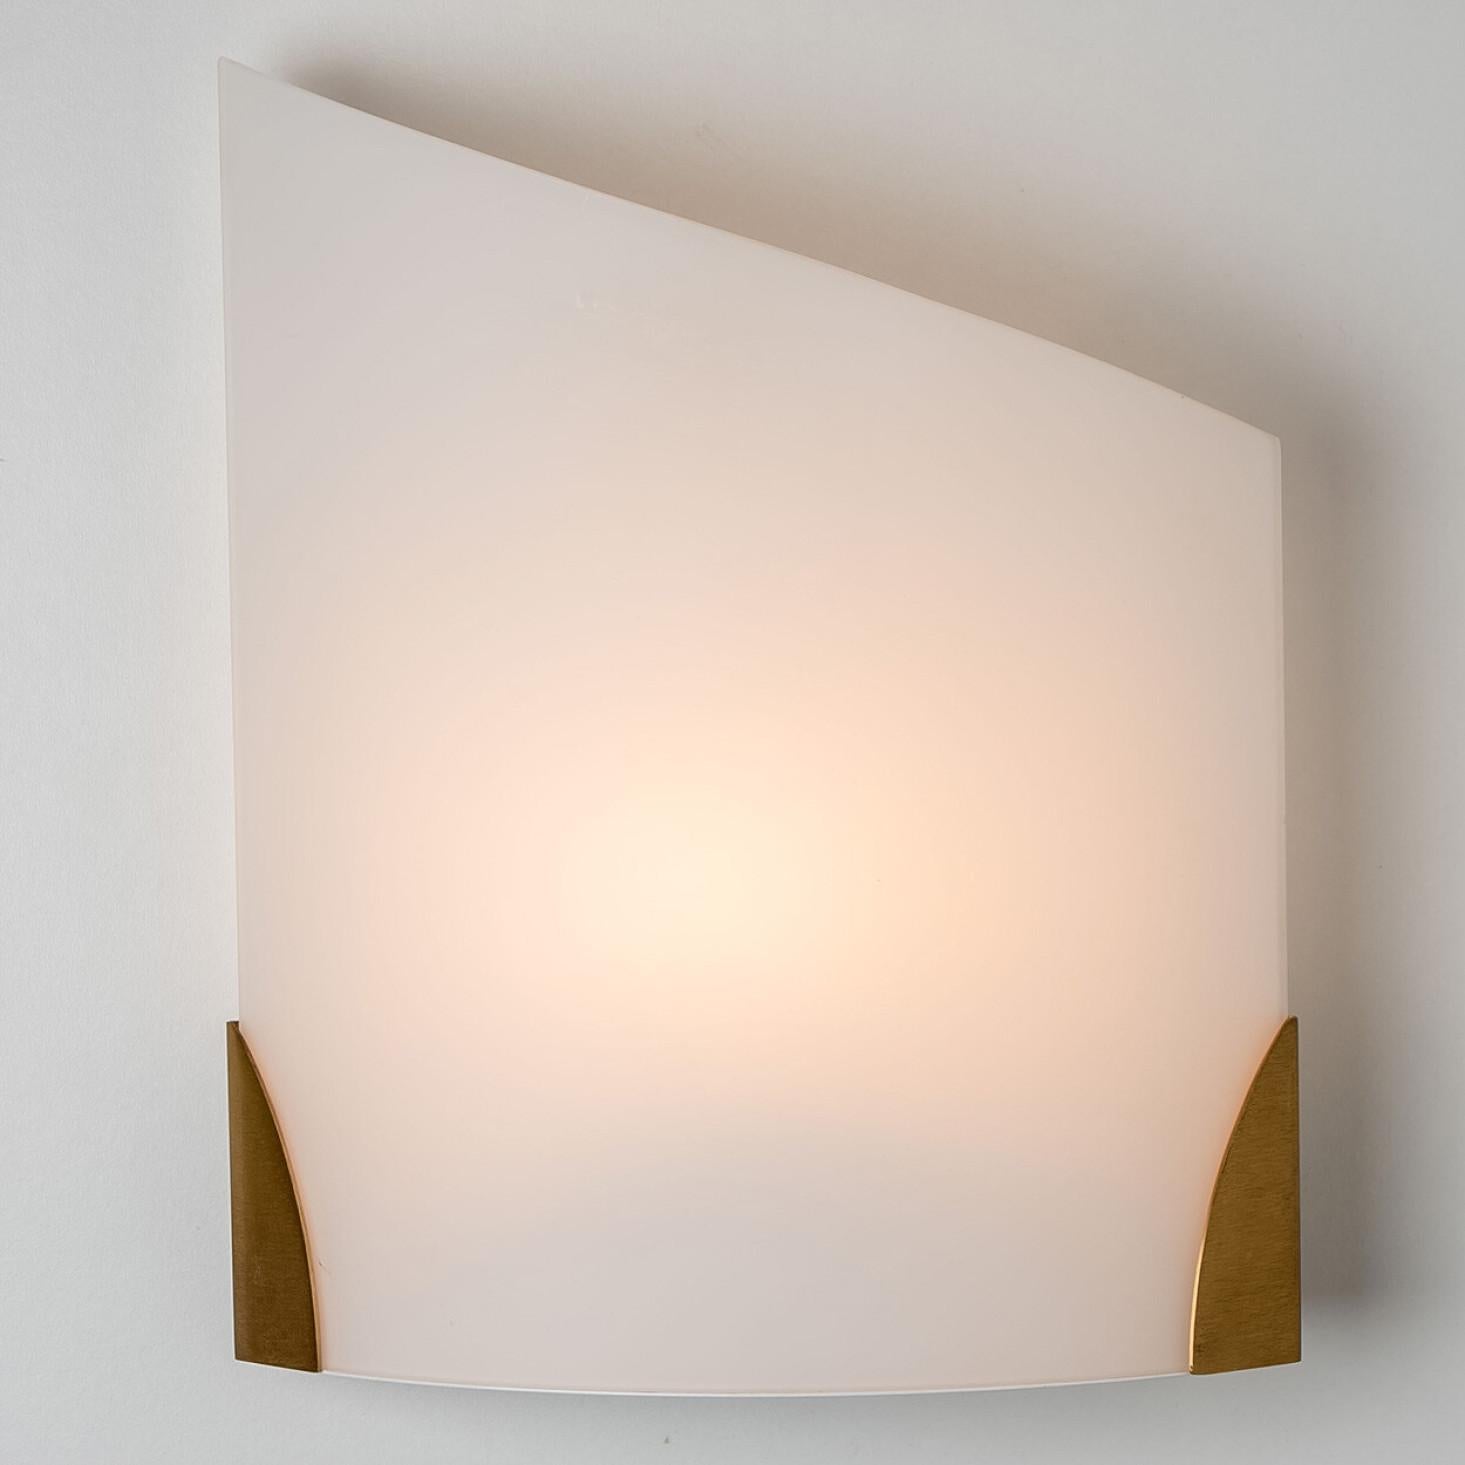 20th Century 1 of 4 Cylinder Shaped White Opaque Glass Wall Lights by Glashütte Limburg For Sale